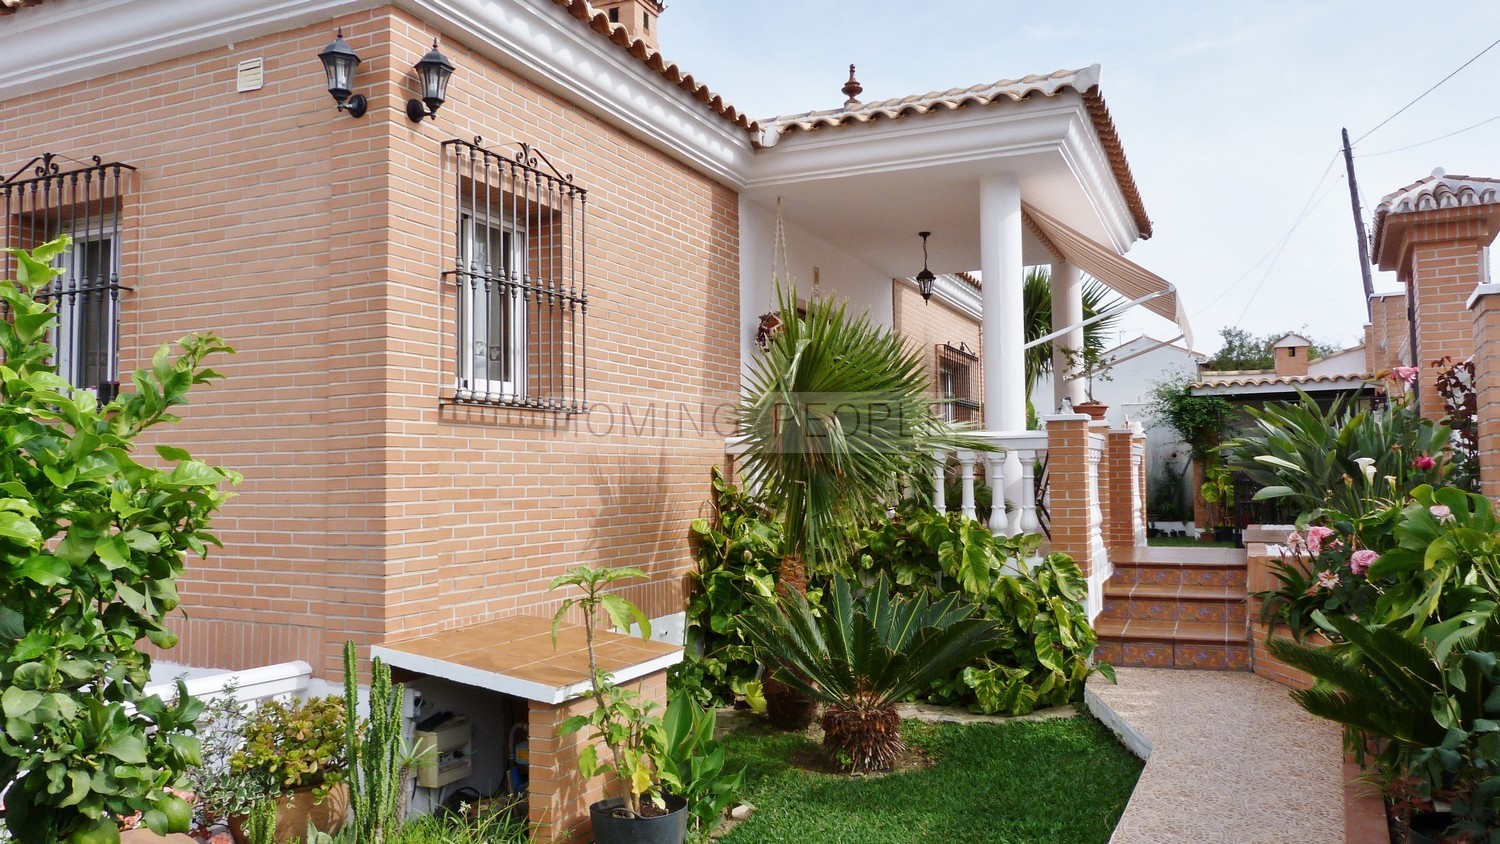 Quality villa, recently built as 3 independent apartments